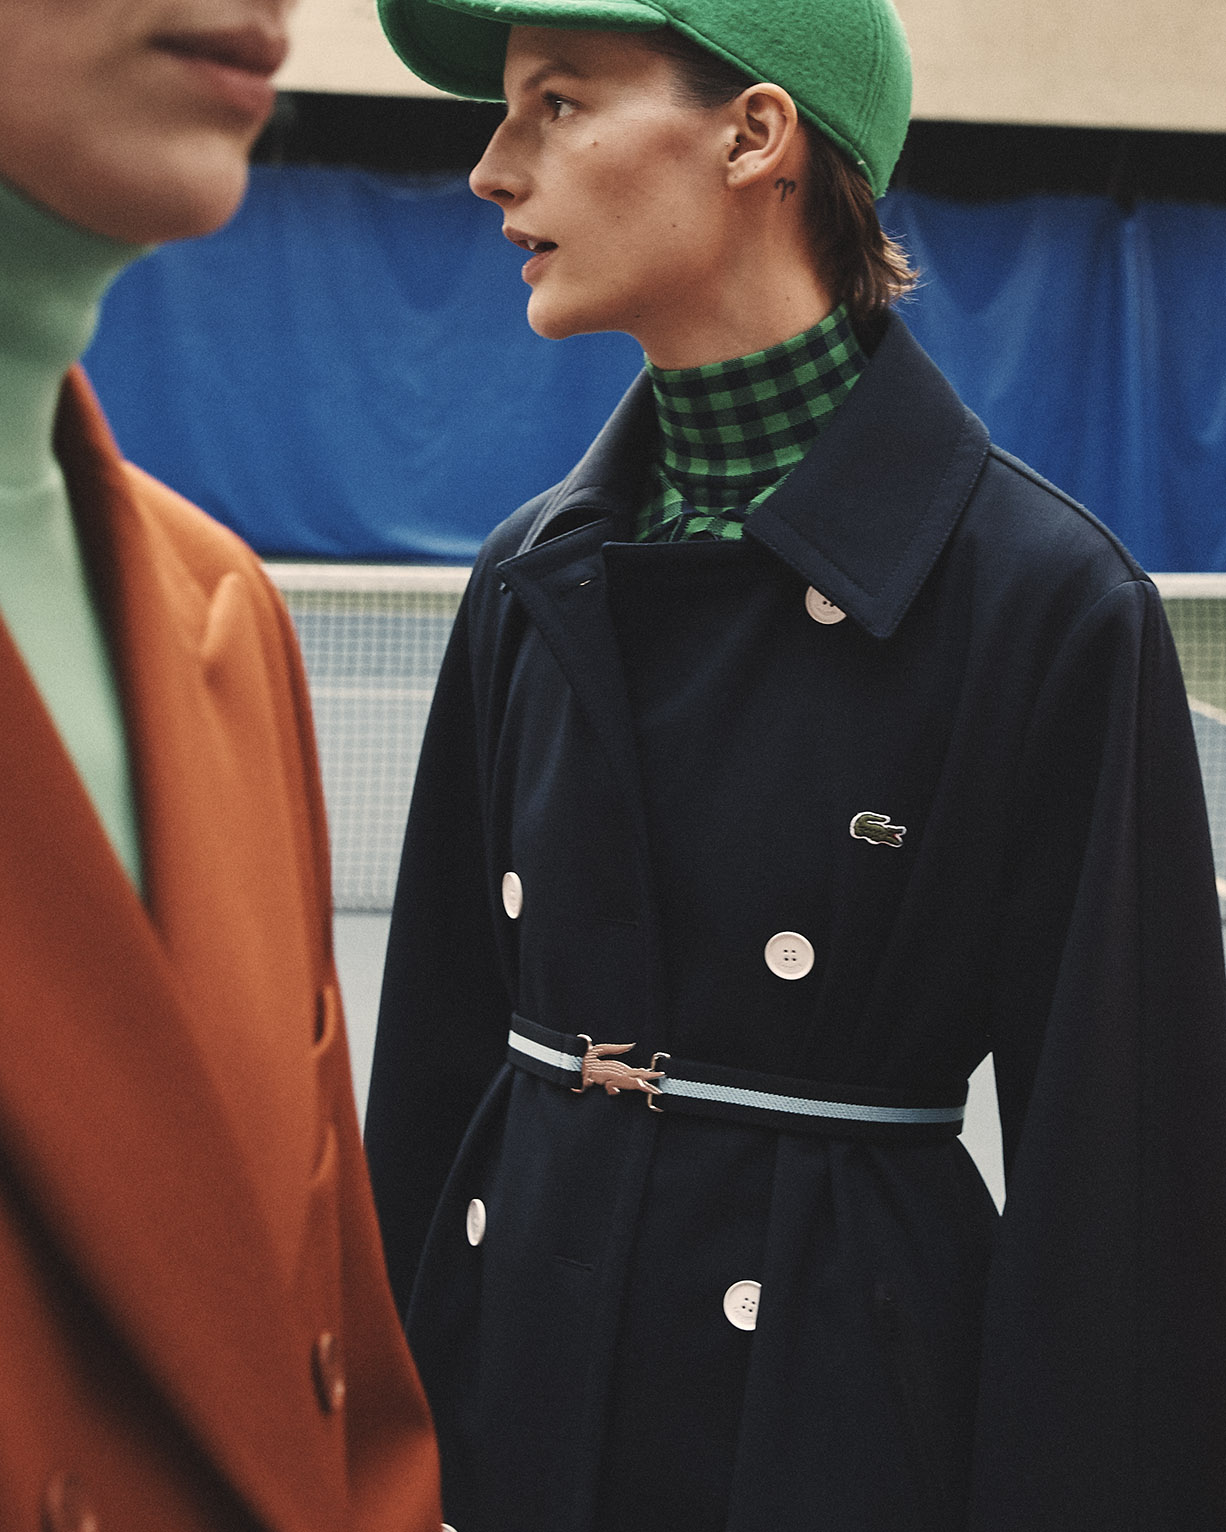 LACOSTE AW20_04 by Ronan Gallagher